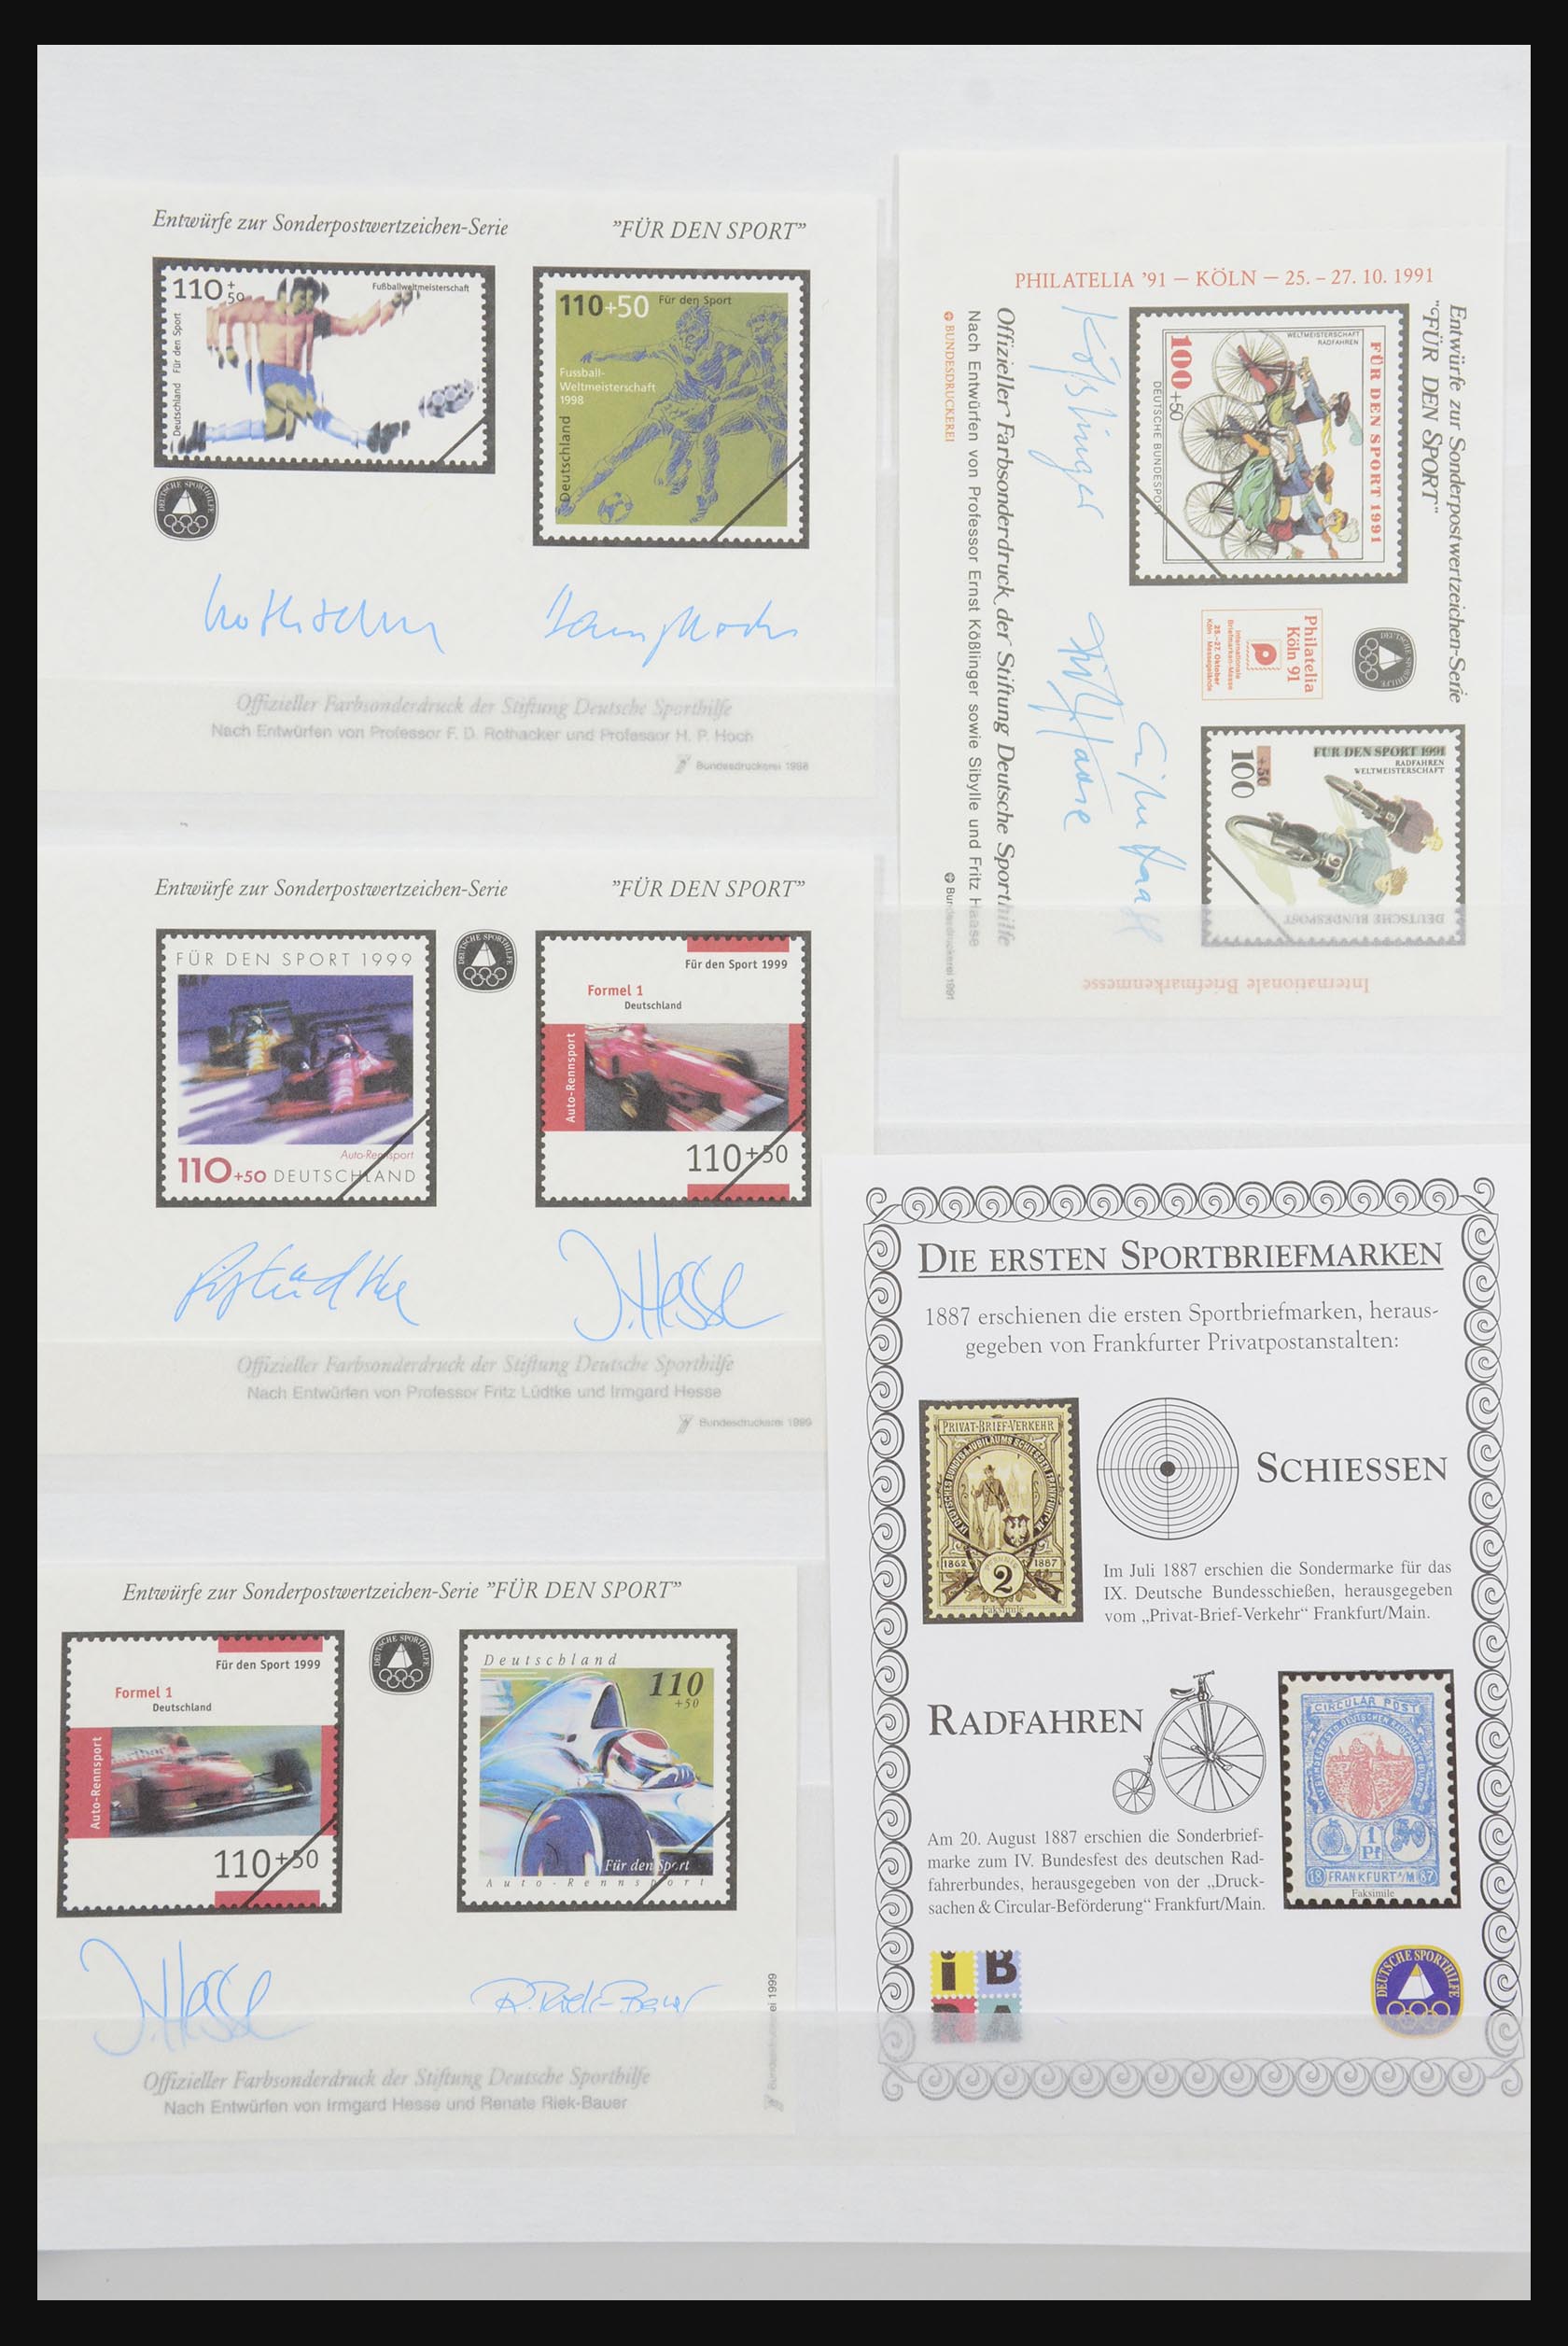 32050 005 - 32050 Bundespost special sheets 1980-2010.